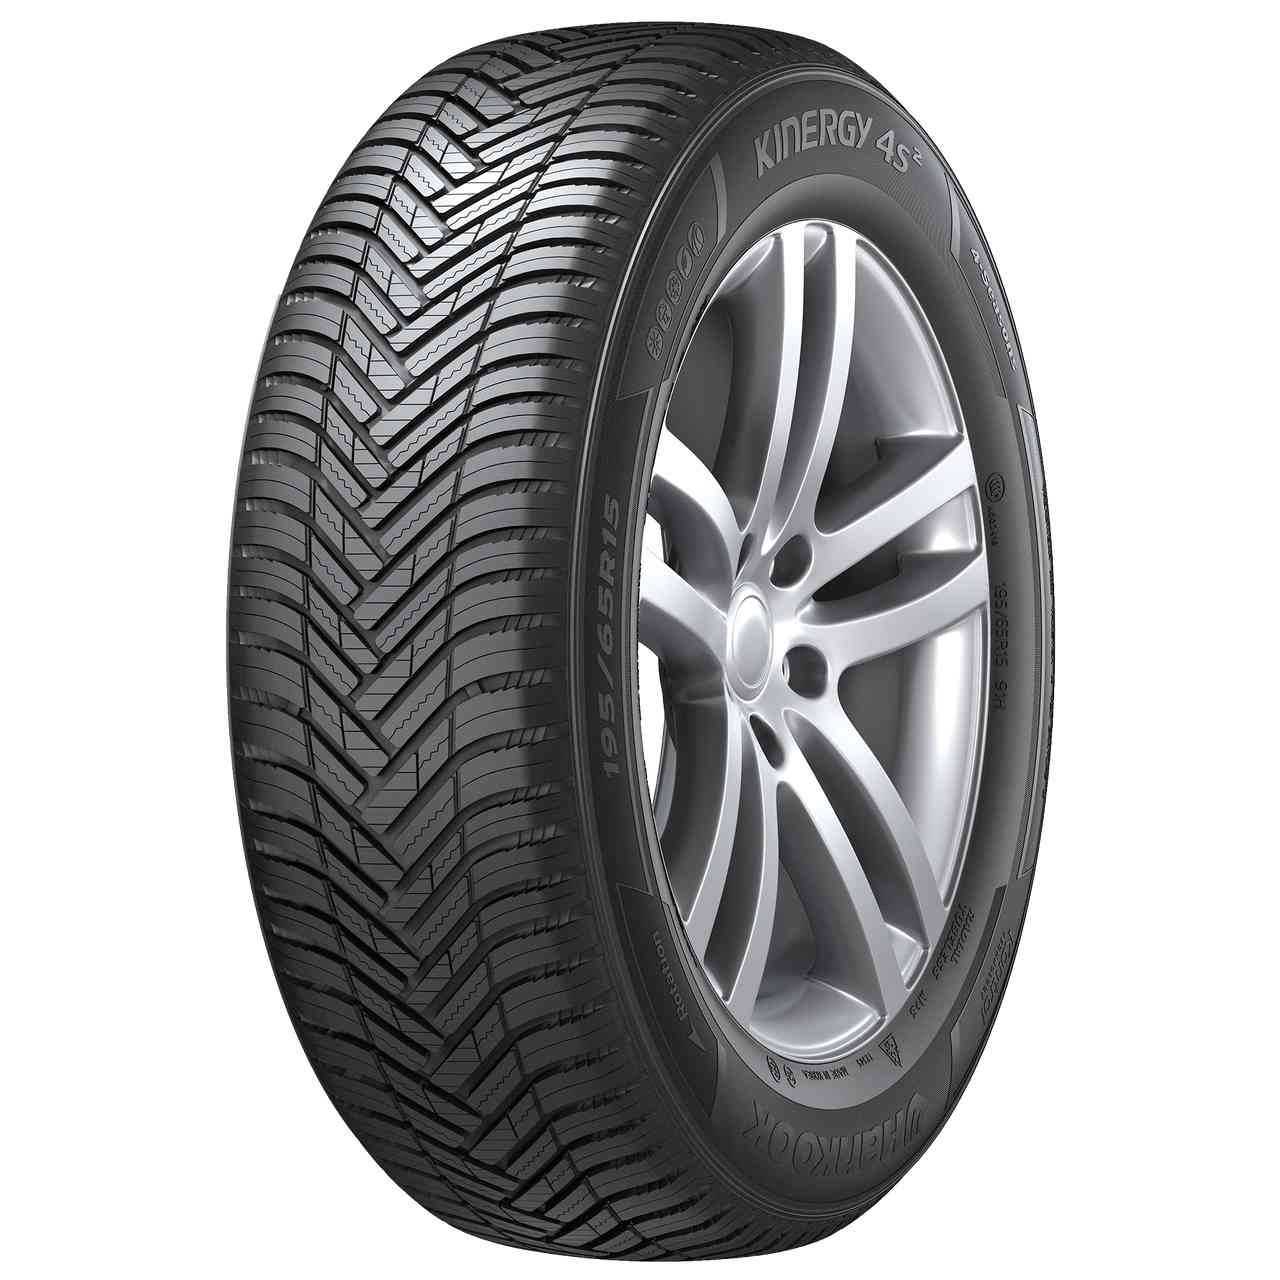 HANKOOK KINERGY 4S 2 (H750) 215/40R17 87V BSW